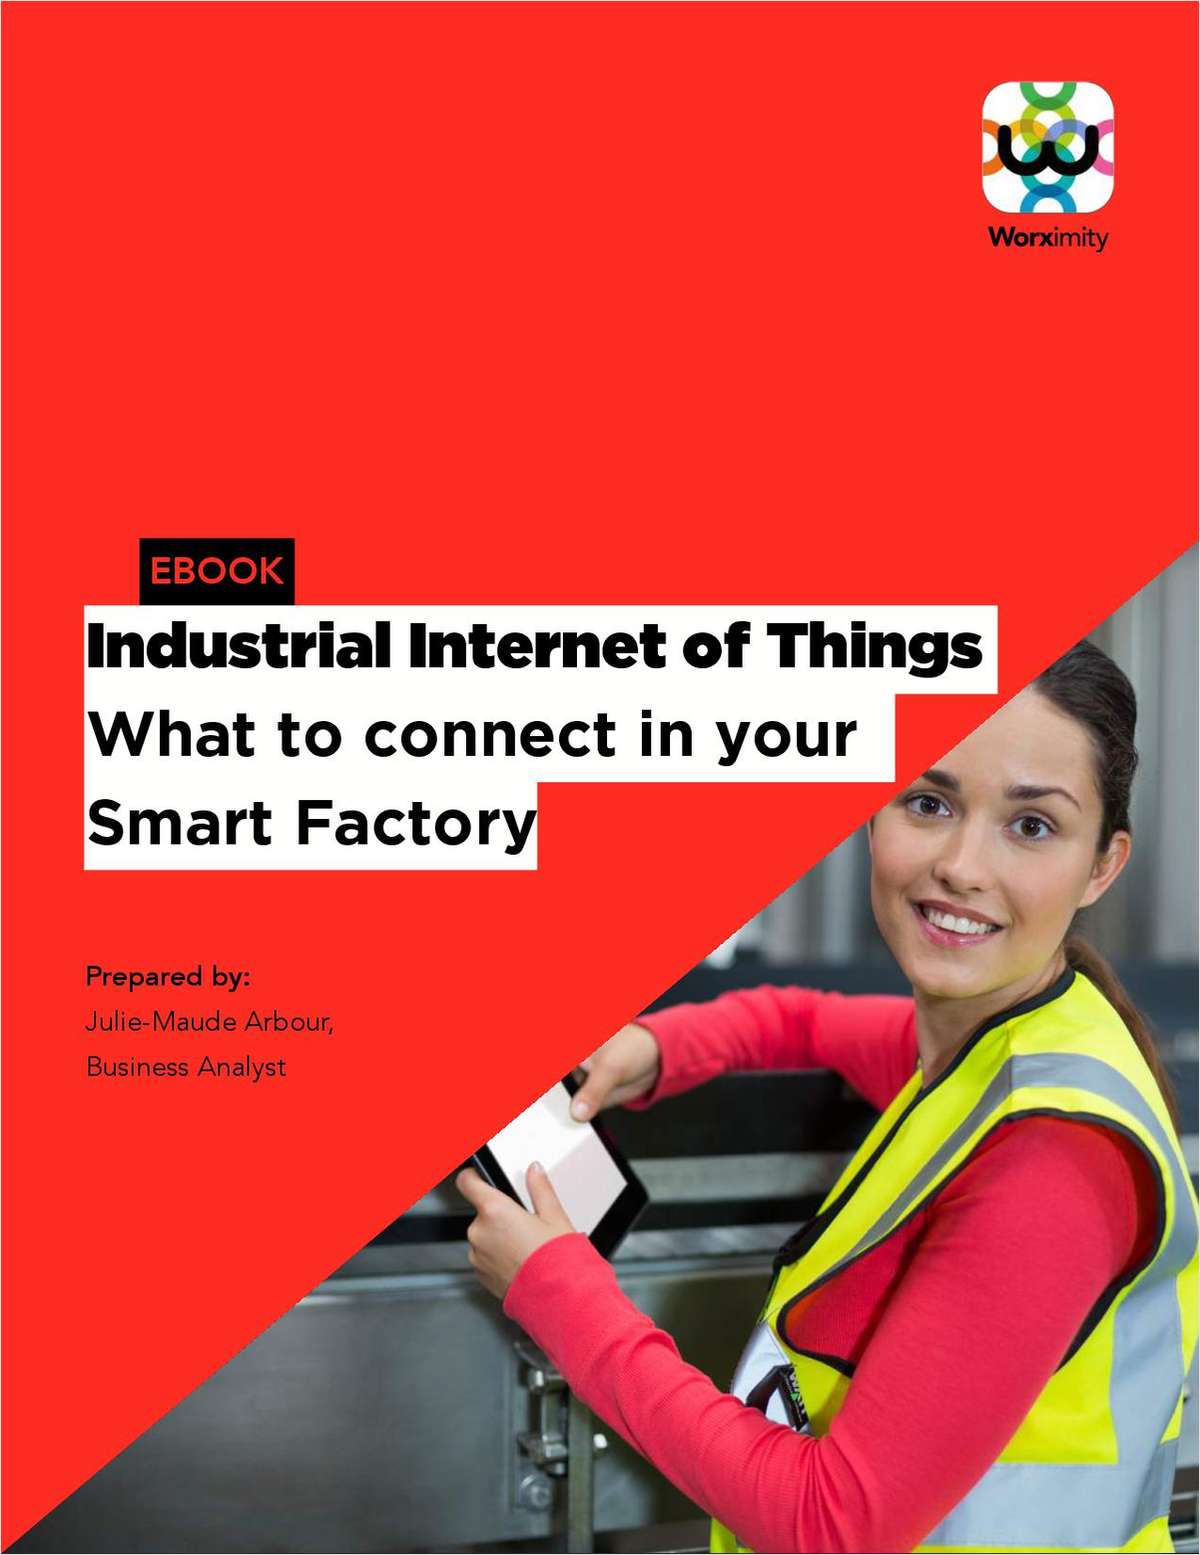 Industrial Internet of Things - What to Connect in Your Factory